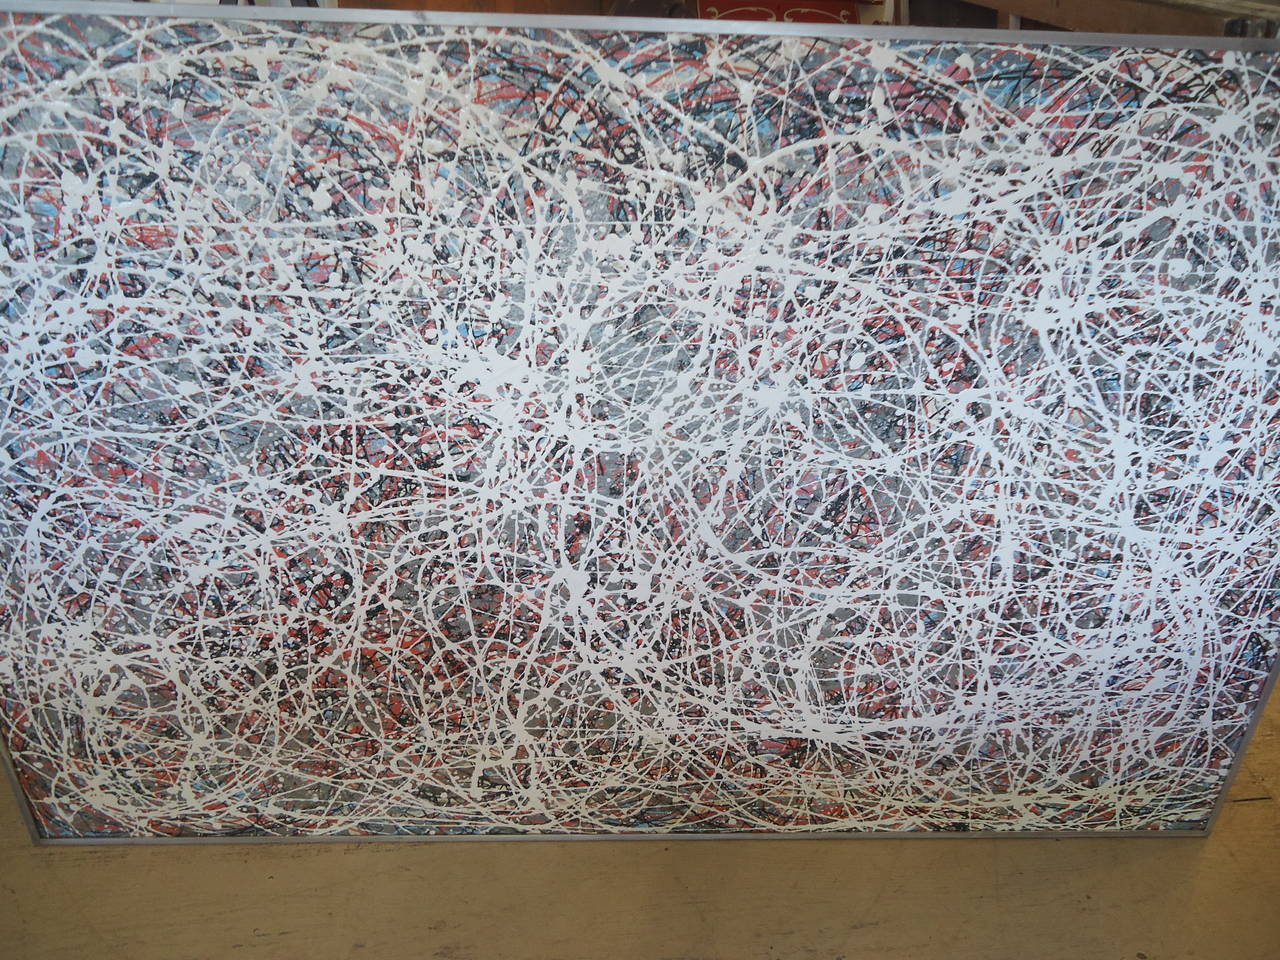 Striking large abstract expressionist painting in the style of drip painting that Jackson Pollock made famous. Pewter grey, white, coral, blue and black make up the color palette. Custom steel frame. No signature.